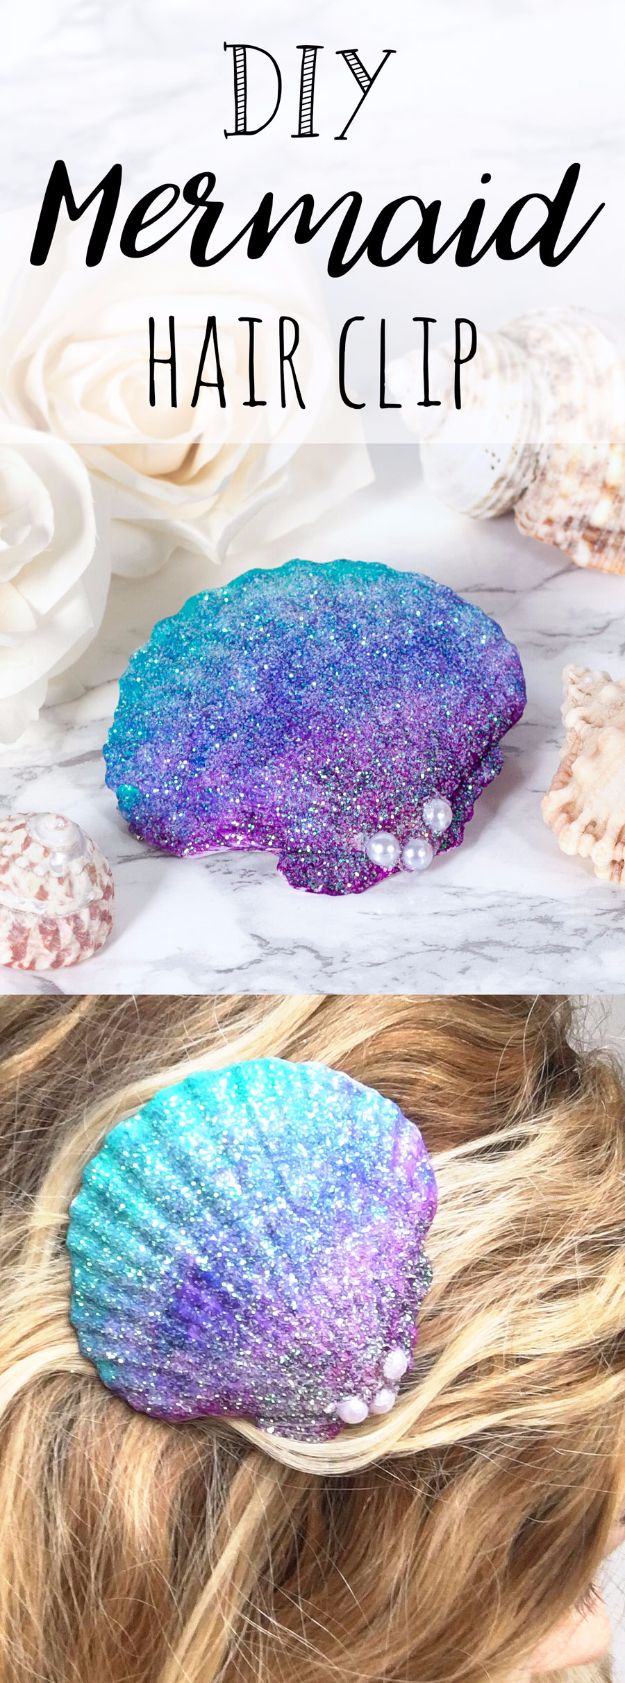 DIY Mermaid Crafts - DIY Mermaid Hair Clip - How To Make Room Decorations, Art Projects, Jewelry, and Makeup For Kids, Teens and Teenagers - Mermaid Costume Tutorials - Fun Clothes, Pillow Projects, Mermaid Tail Tutorial 